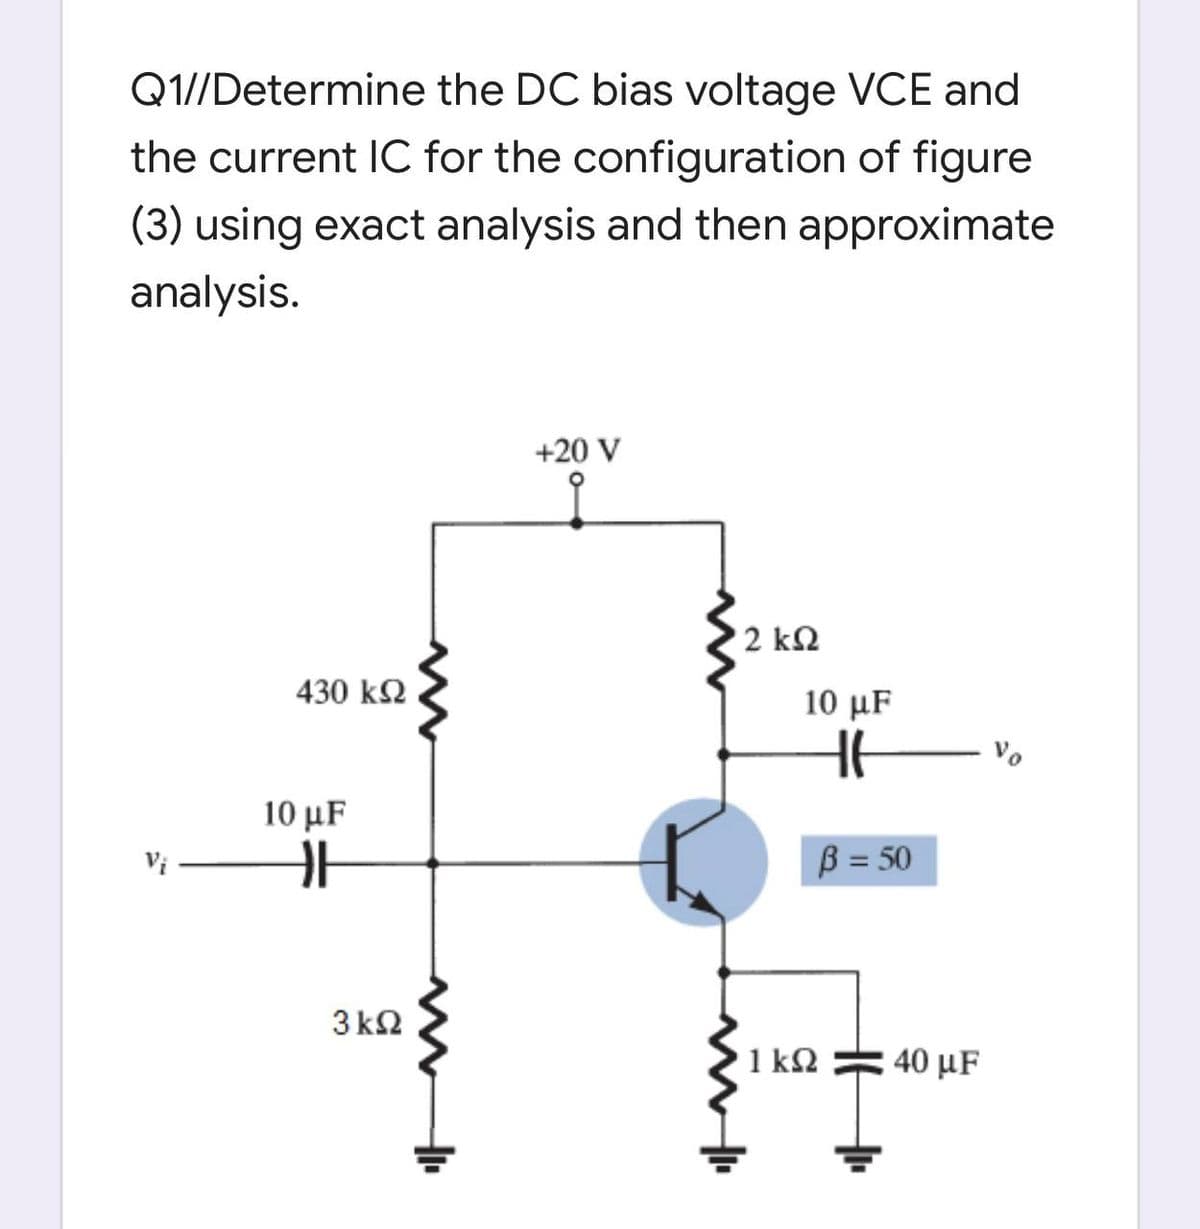 Q1//Determine the DC bias voltage VCE and
the current IC for the configuration of figure
(3) using exact analysis and then approximate
analysis.
+20 V
2 ΚΩ
430 k2
10 μ
Vo
10 μF
B = 50
3 k2
1 k2
40 μF
